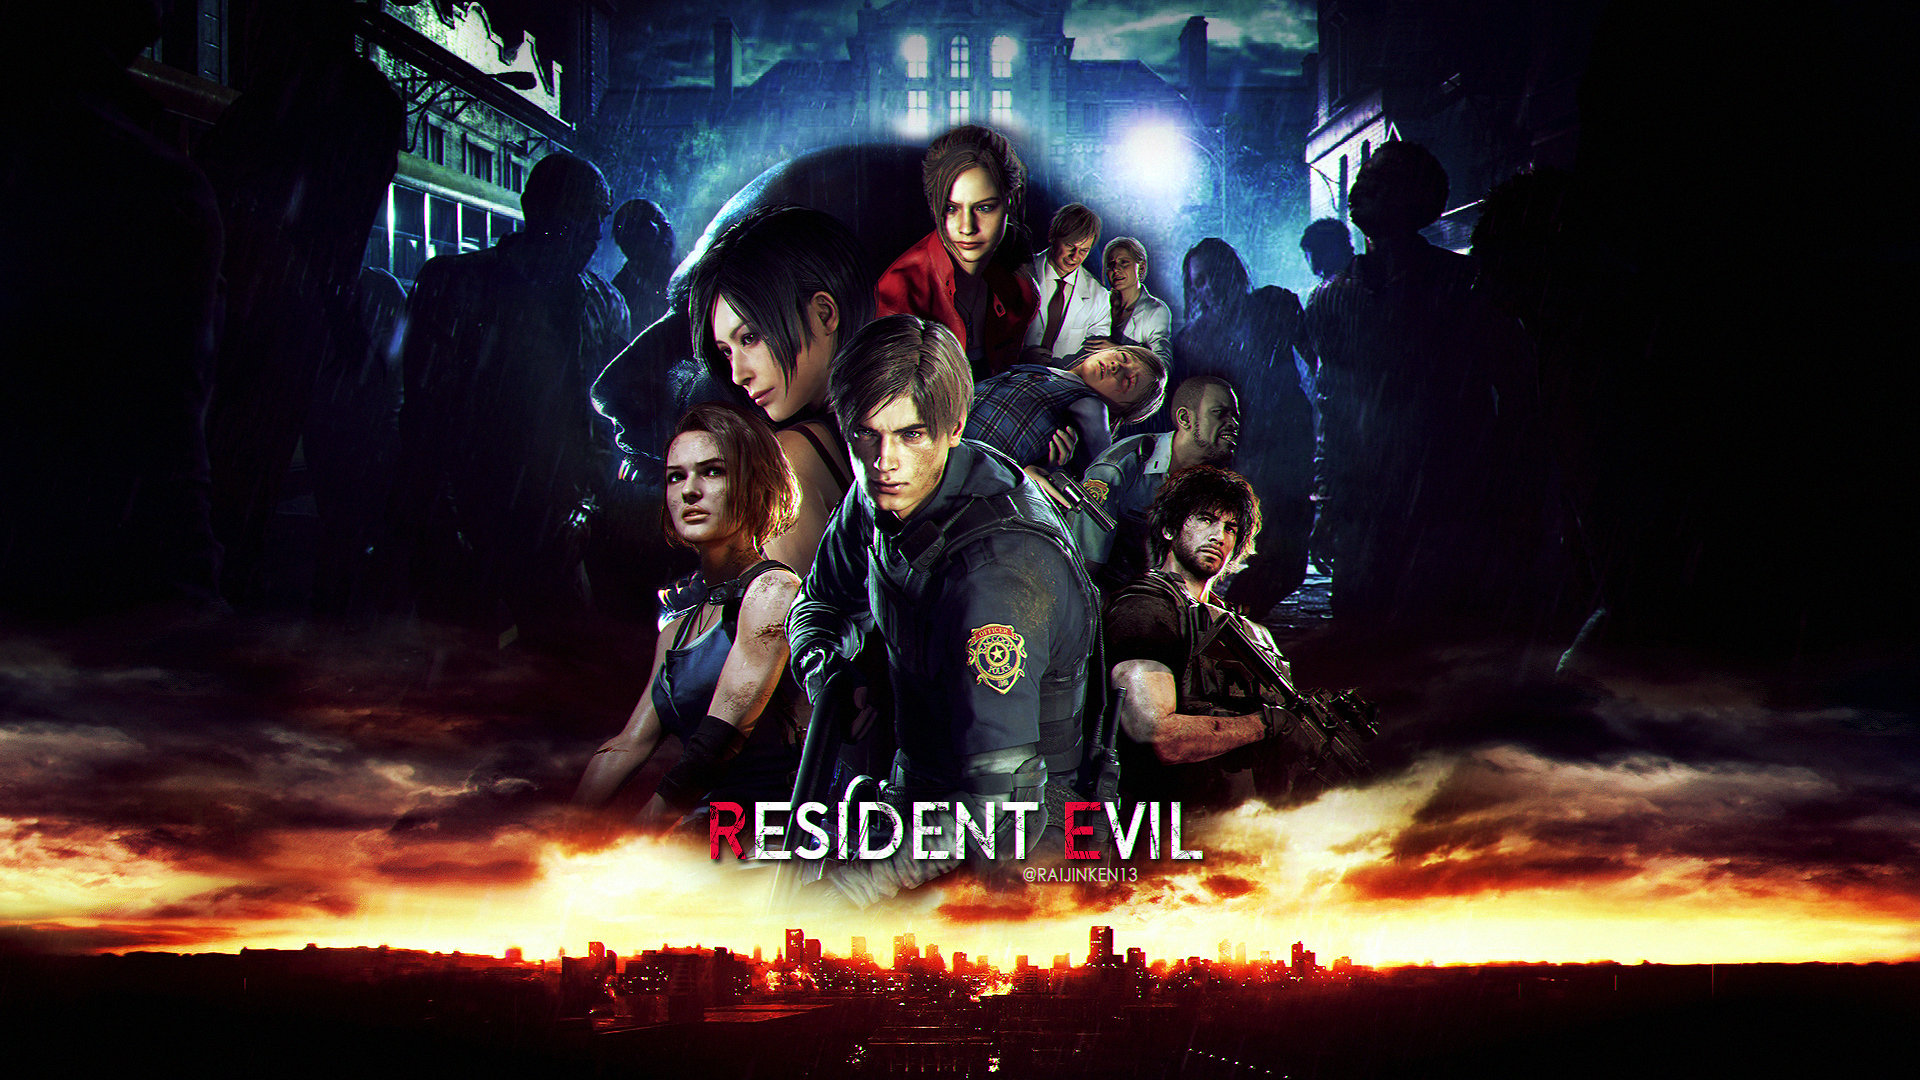 Some Resident Evil 2 & 3 remake wallpaper I made for RE3's launch